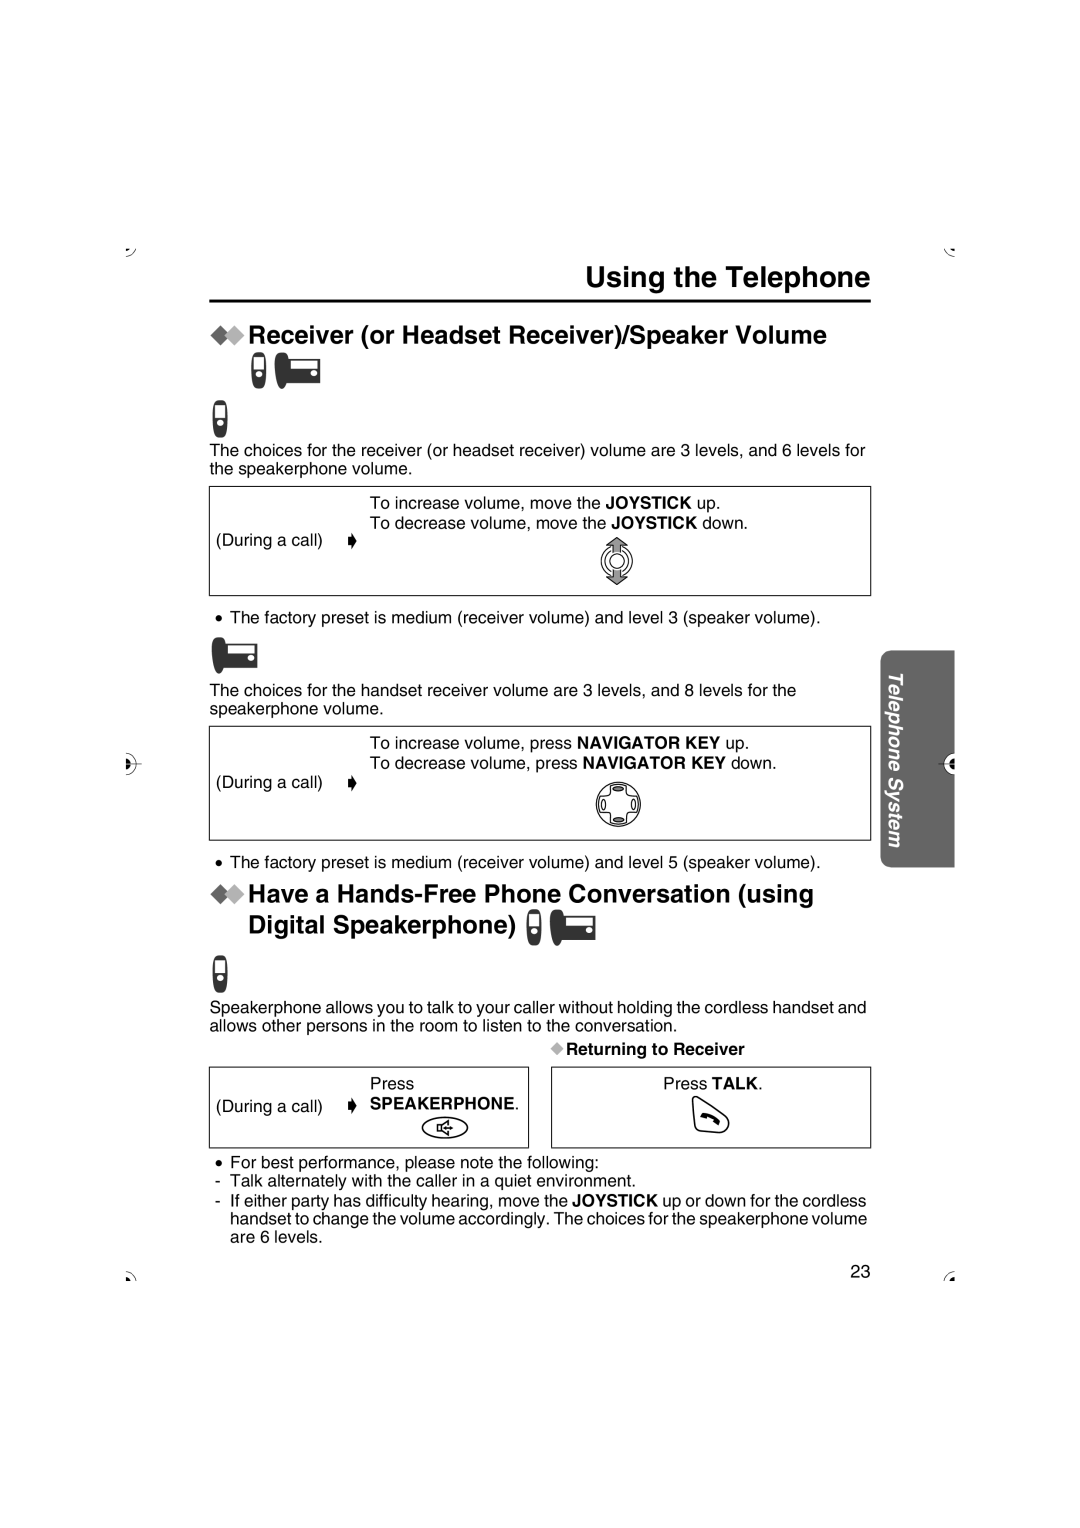 Panasonic KX-TCD535HK operating instructions Receiver or Headset Receiver/Speaker Volume, Returning to Receiver 